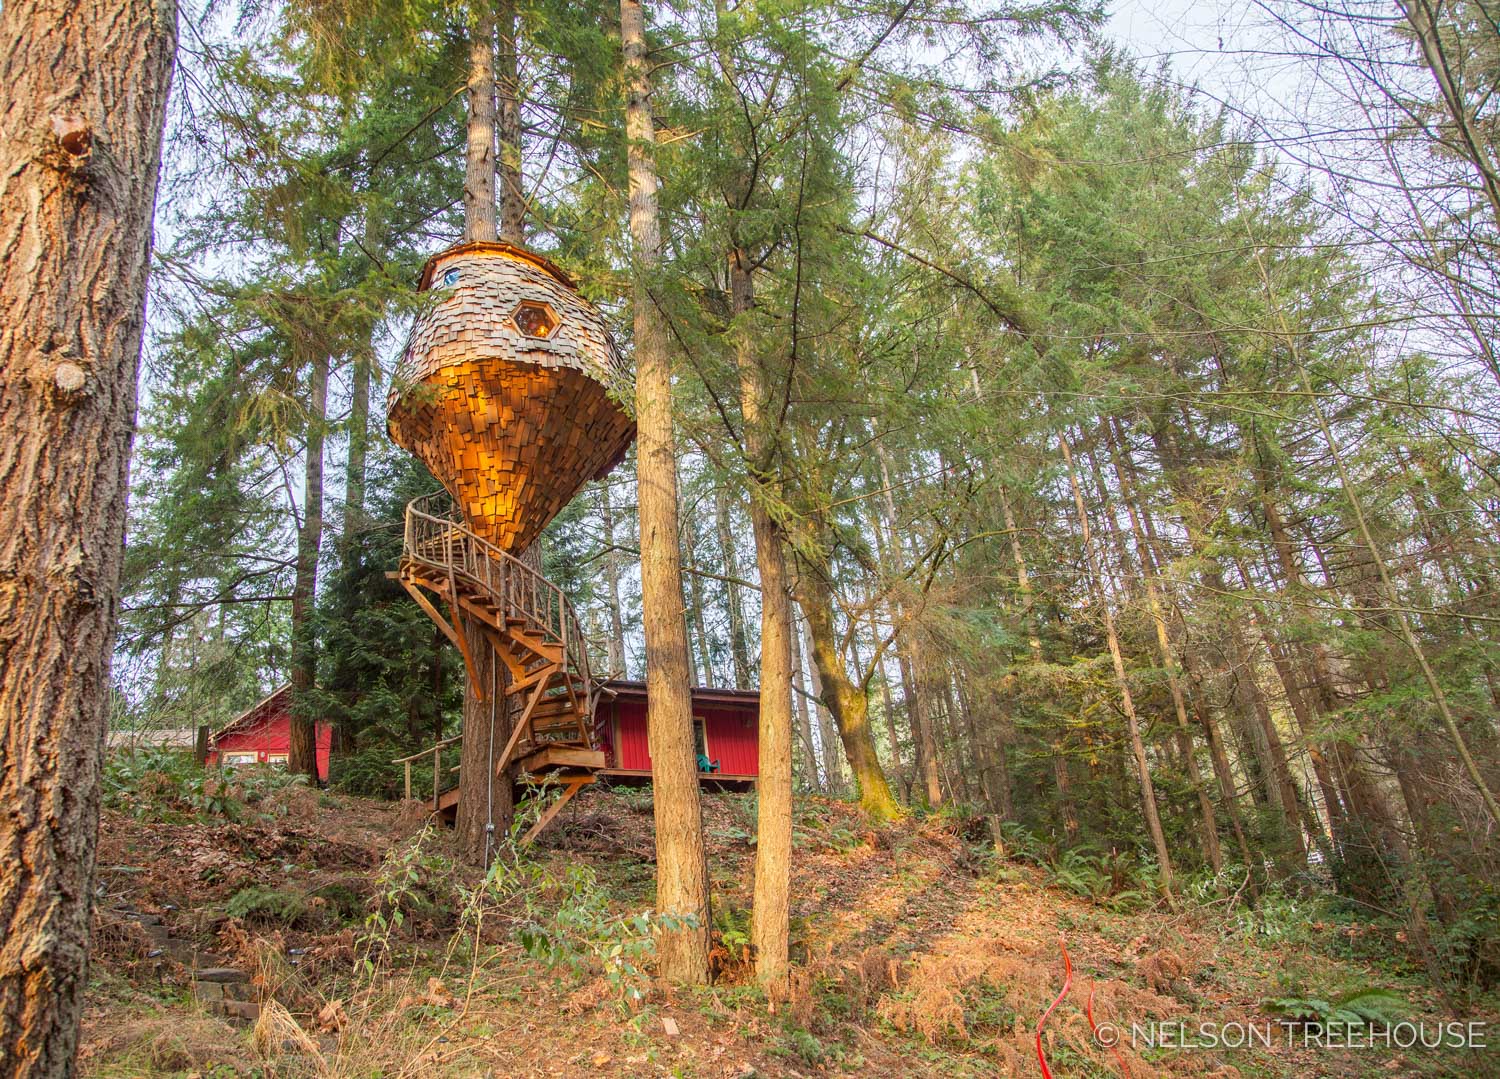  Base view of the Beehive Treehouse 